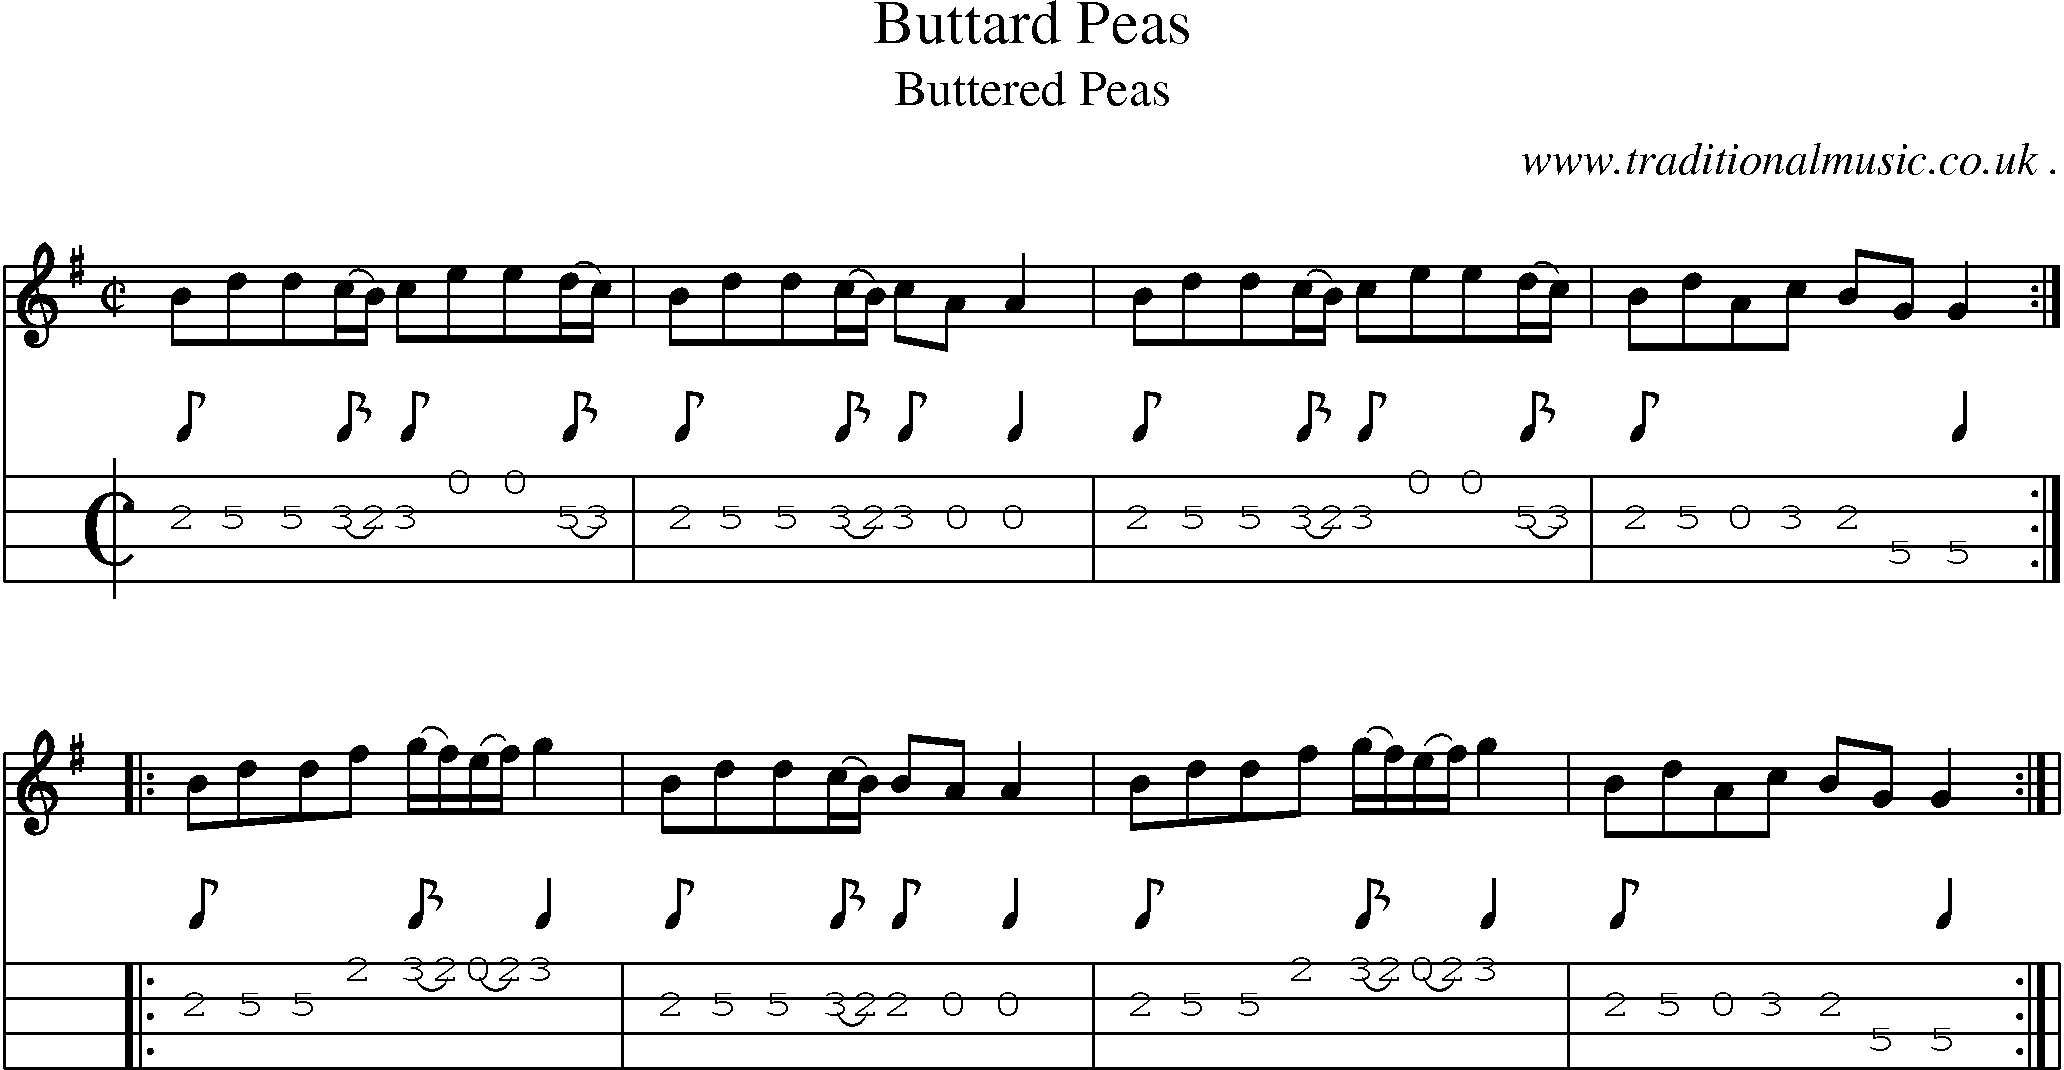 Sheet-Music and Mandolin Tabs for Buttard Peas